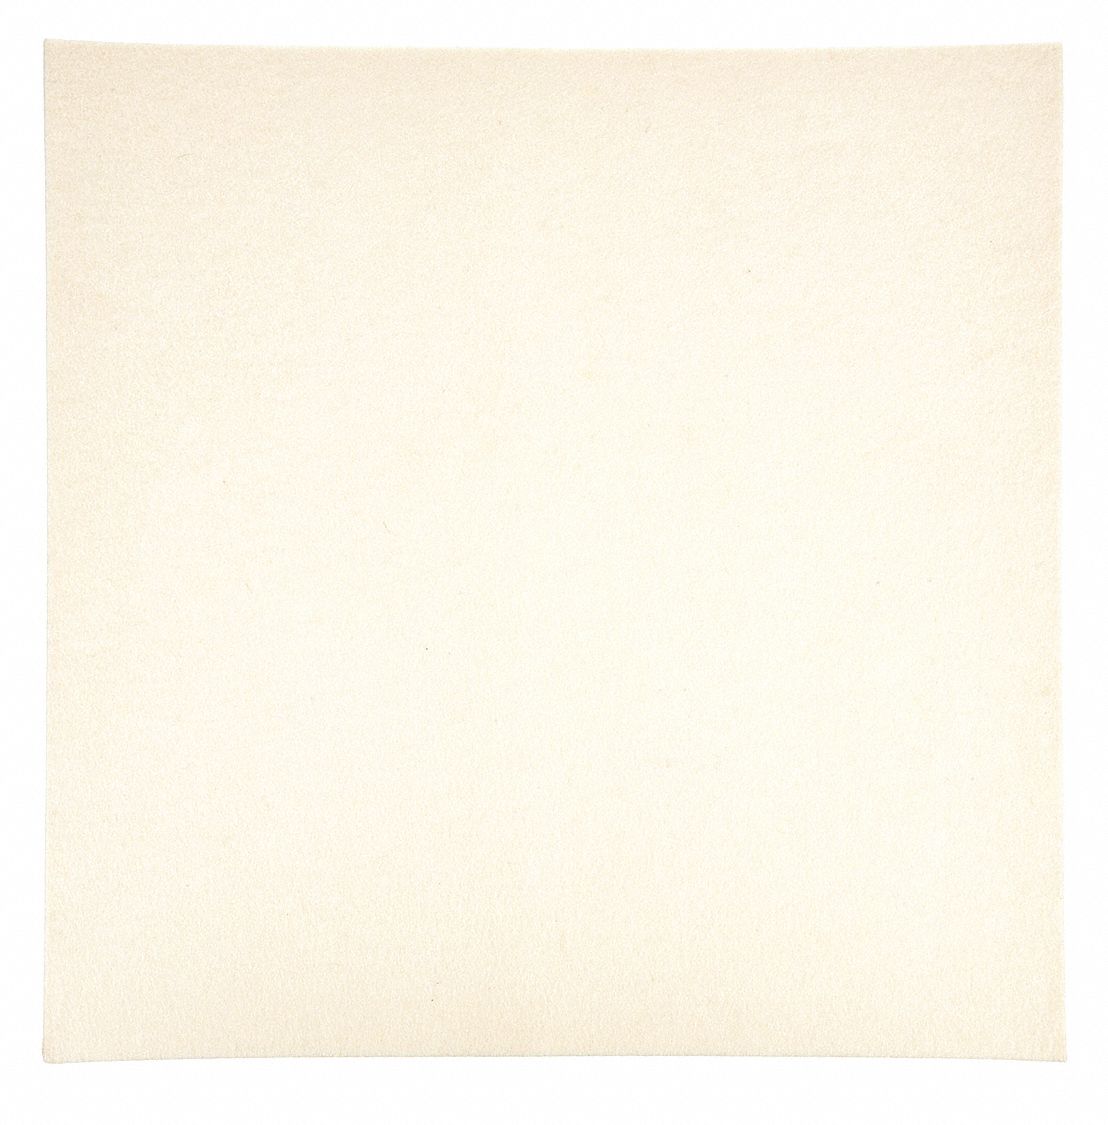 APPROVED VENDOR FELT SHEET,F1,1/4 IN THICK,12 X 12 IN - Felt Sheets and  Strips - GUS2FGW7